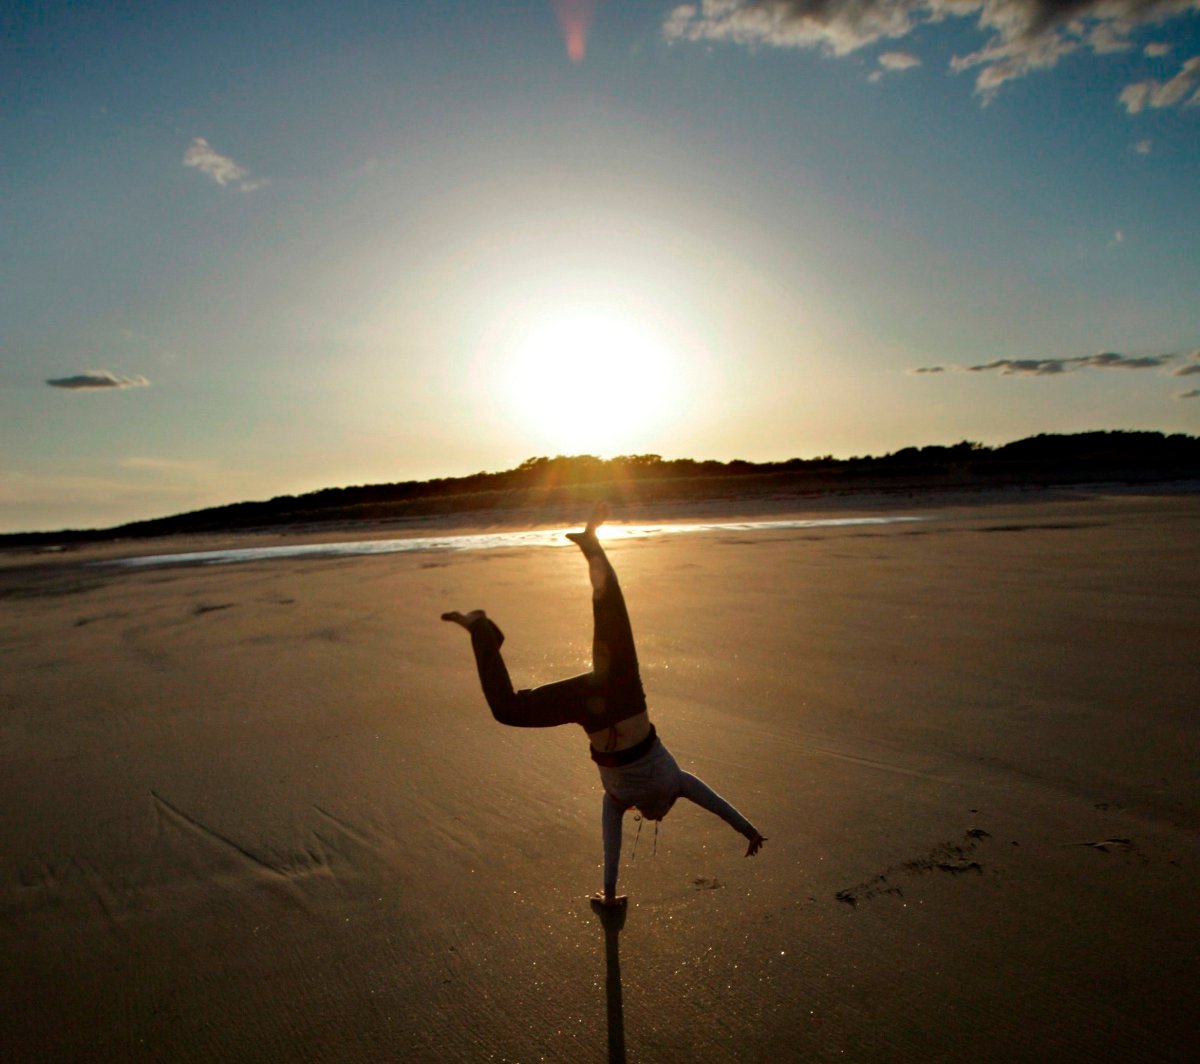 Flyn Costello celebrates the end of a fine day at Popham Beach by doing cartwheels at sunset, Monday, May 21, 2007, in Phippsburg, Maine.  (AP Photo/Robert F. Bukaty).